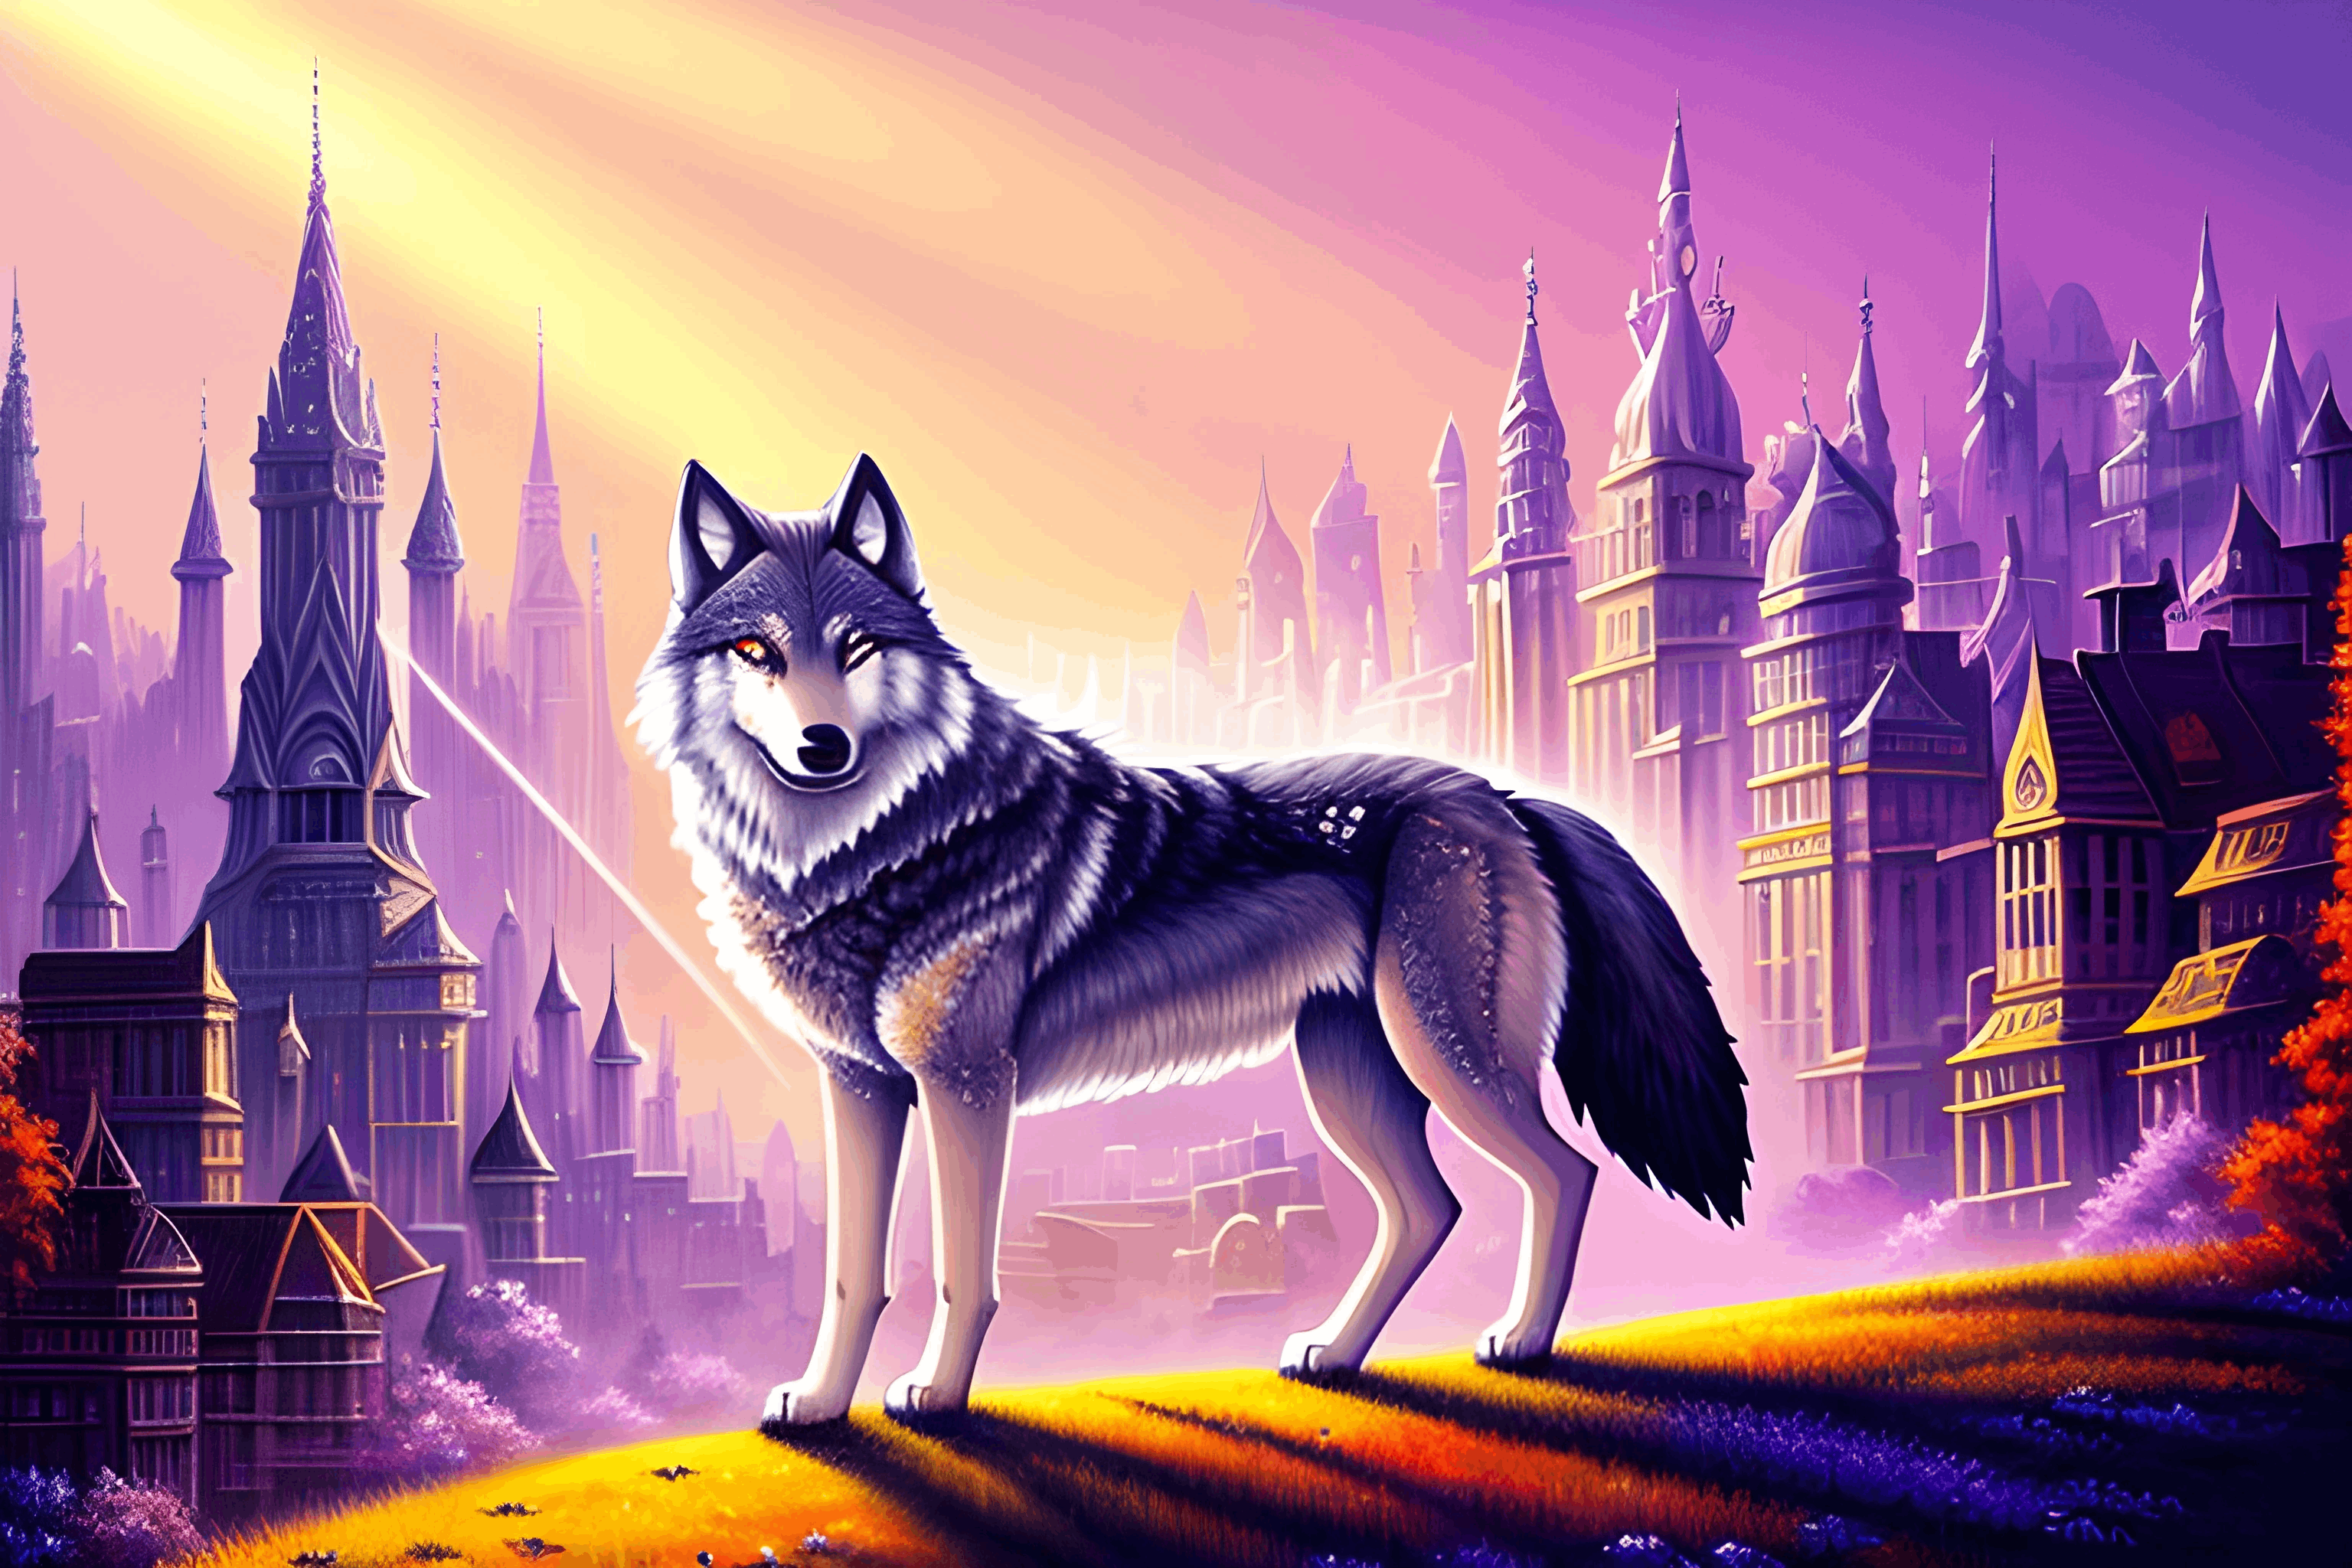 painting of a wolf standing on a hill in front of a city